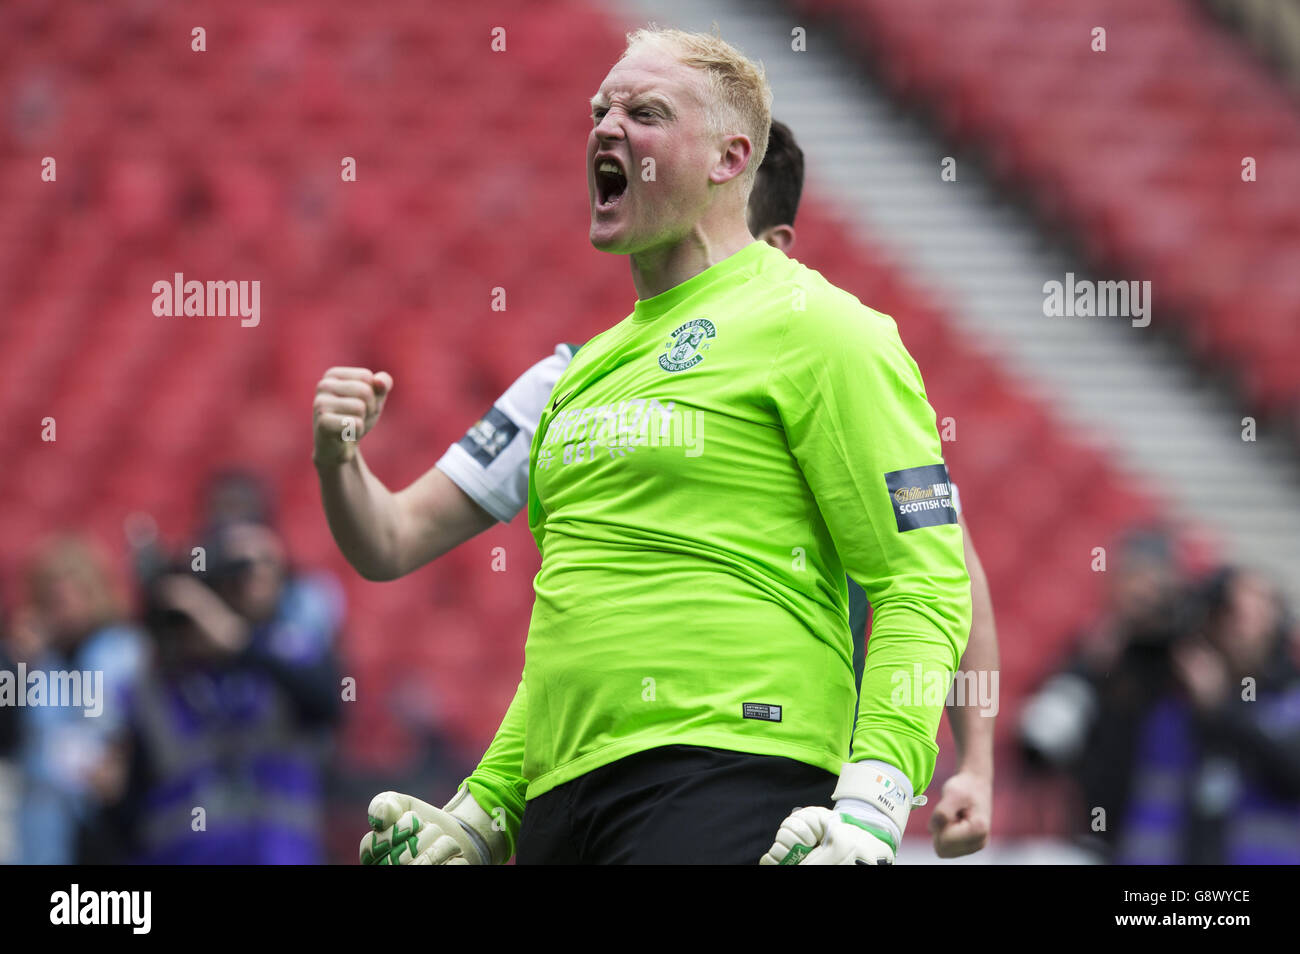 Hibernian goalkeeper Conrad Logan celebrates with team mates at the final whistle during the William Hill Scottish Cup semi-final match at Hampden Park, Glasgow. PRESS ASSOCIATION Photo. Picture date: Saturday April 16, 2016. See PA story SOCCER Glasgow. Photo credit should read: Jeff Holmes/PA Wire. Stock Photo